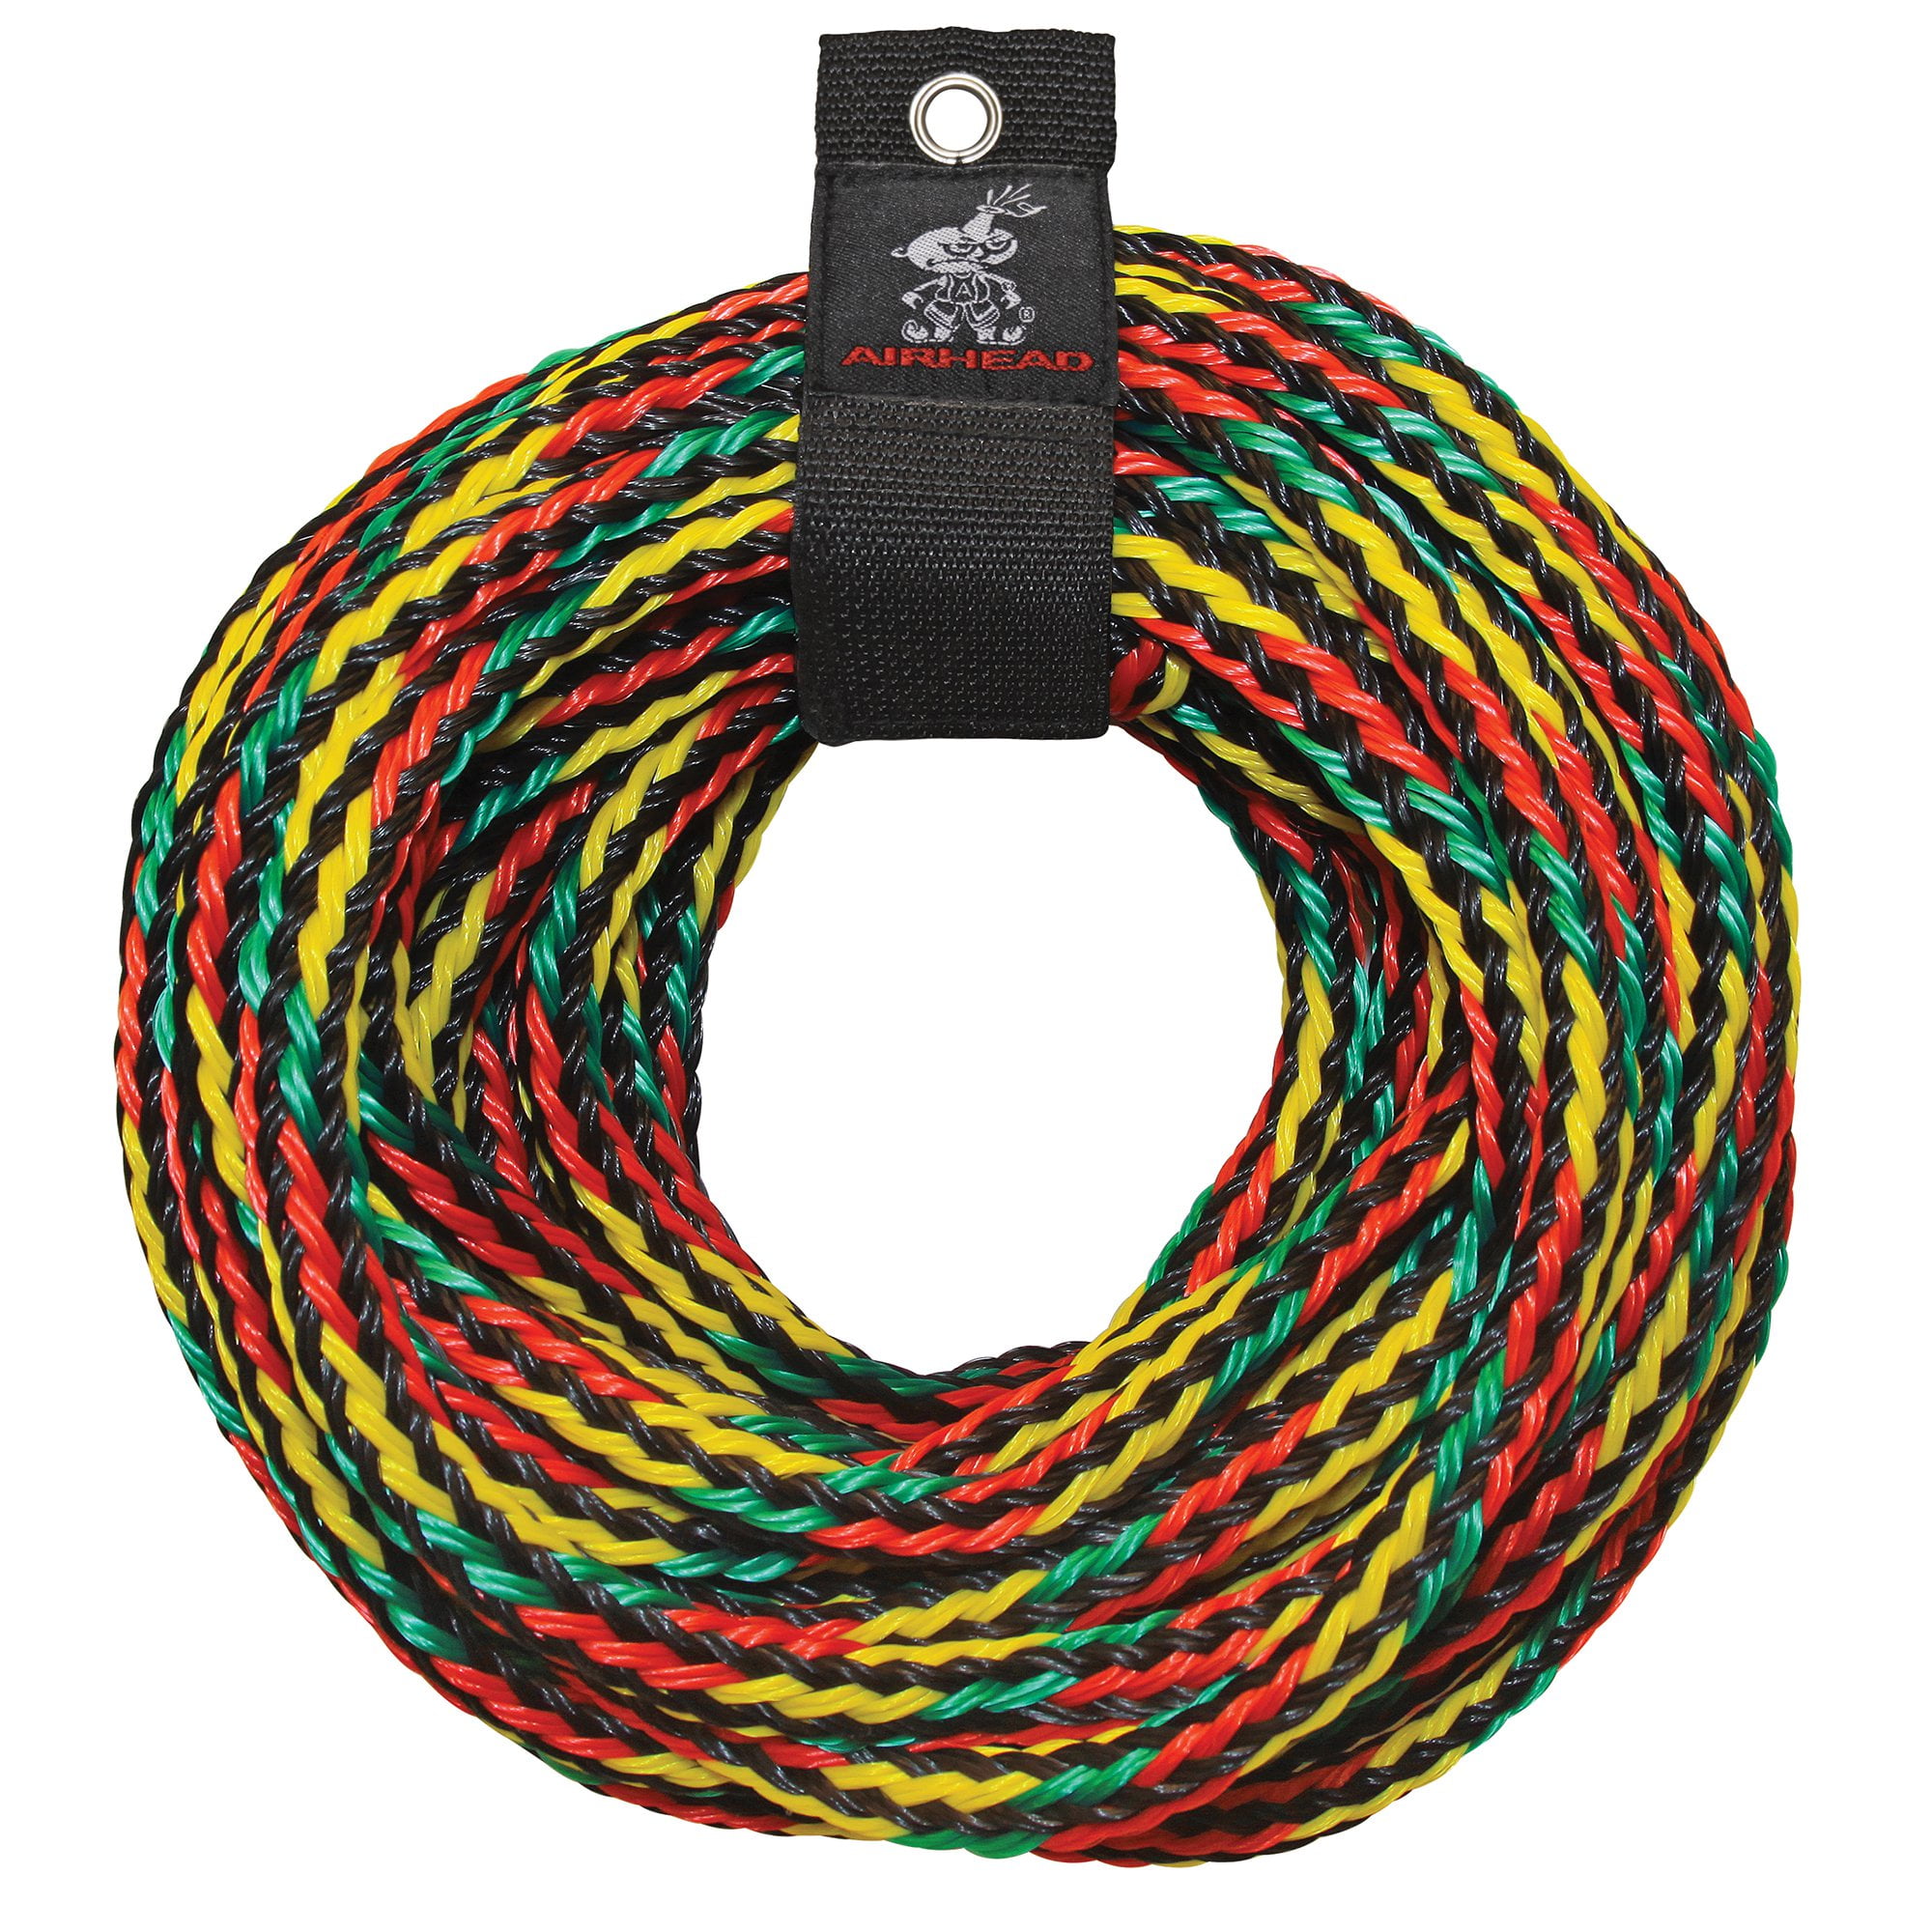 Airhead 2-Section Tow Ropes 1-4High quality Rider Ropes Towable Tubes Durable 